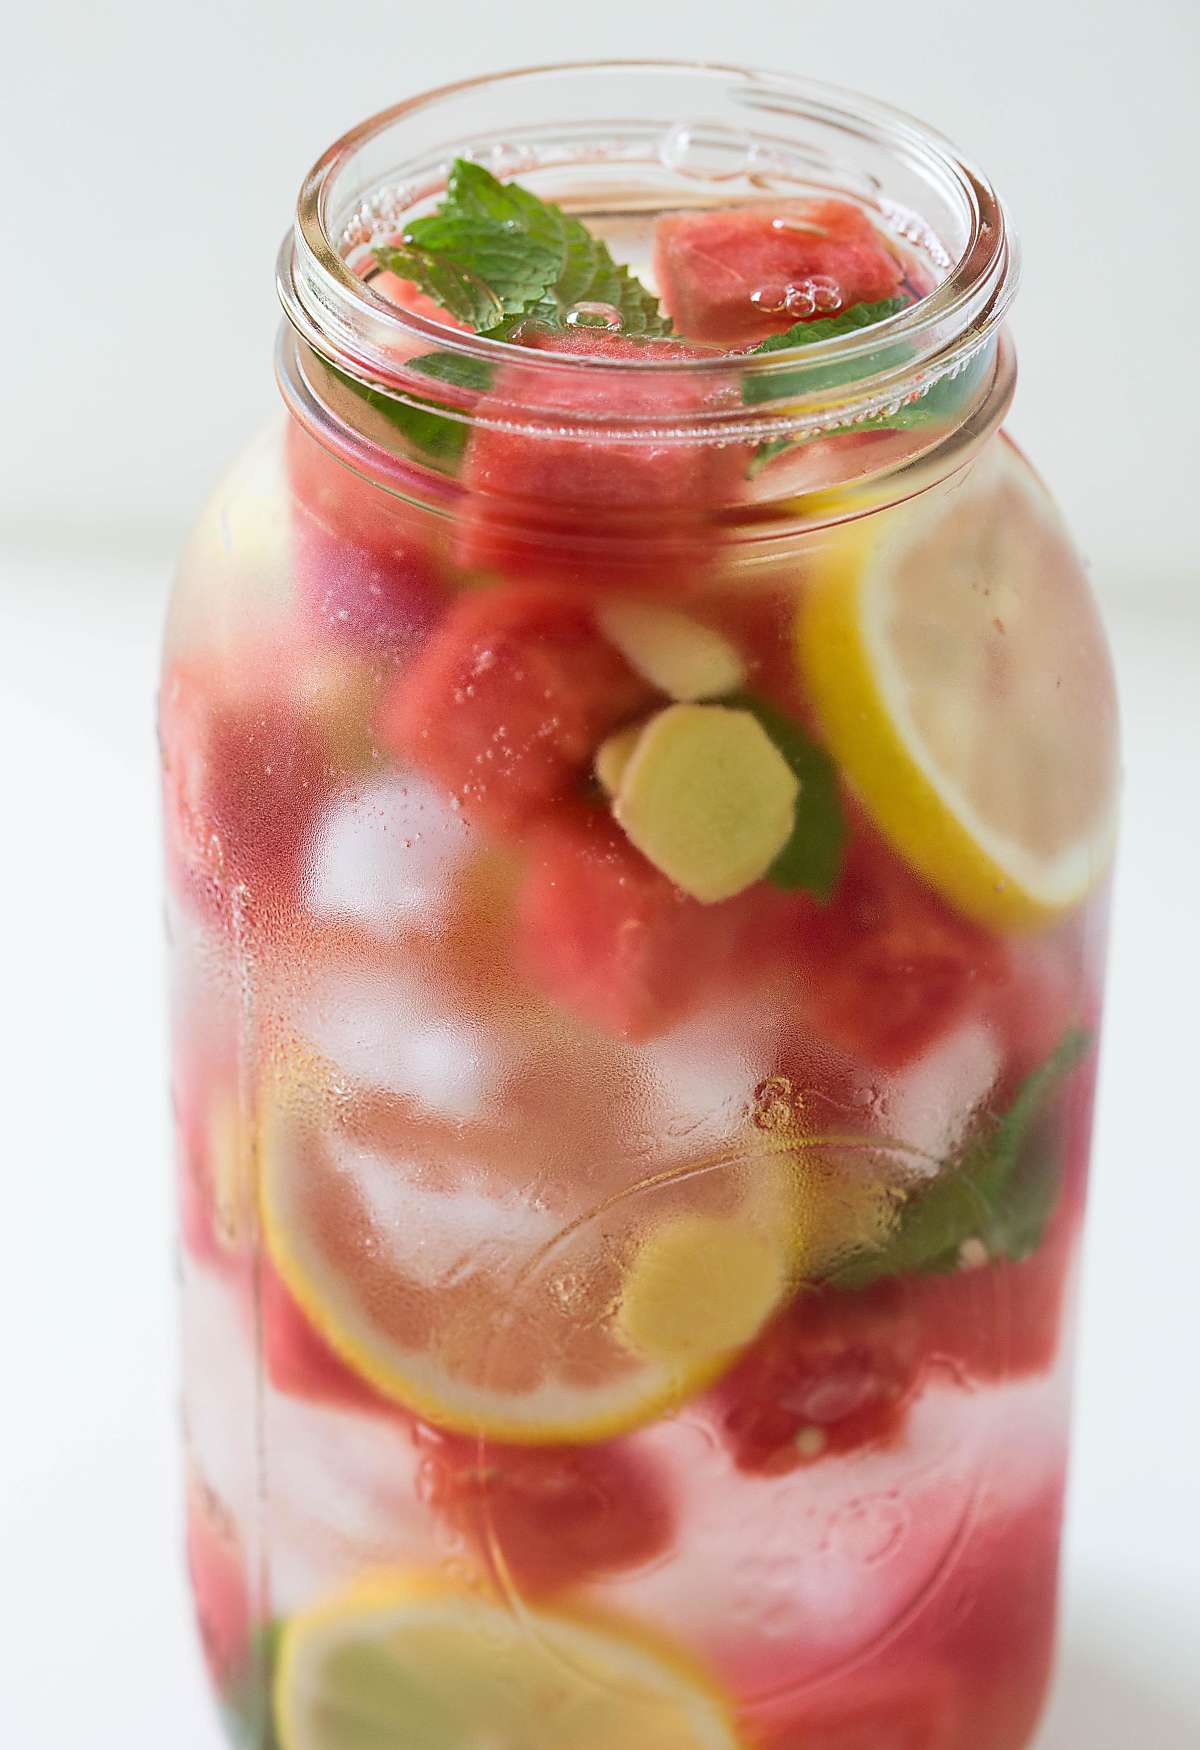 Refreshing Watermelon Detox Water - give a healthy twist to your regular drinking water with fresh watermelon, lemon, mint, and some ginger.